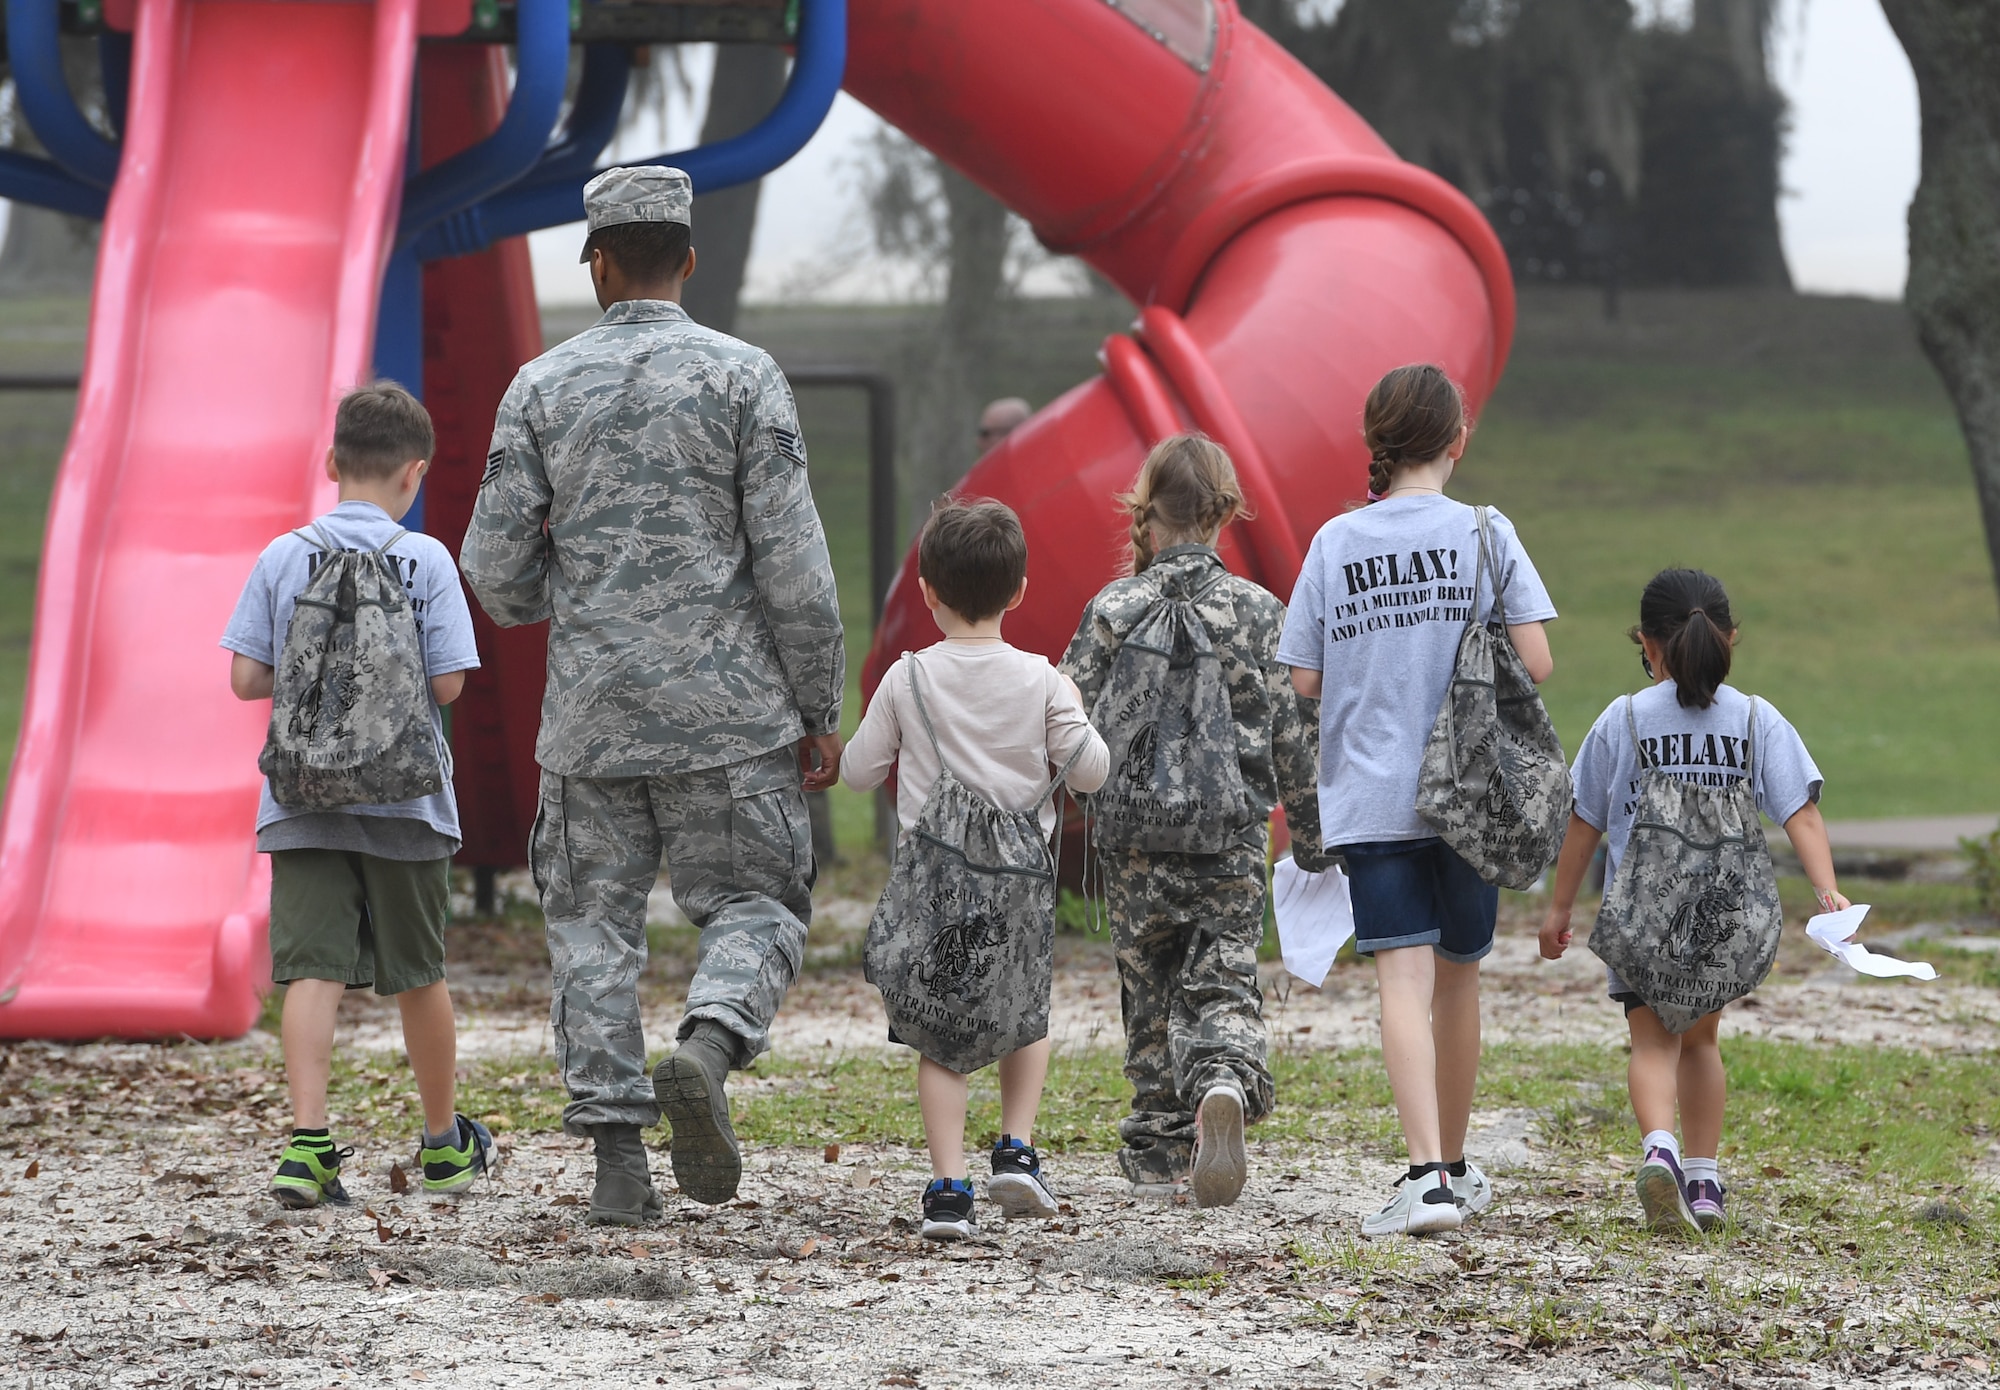 Military children are escorted to the next check list item during Operation Hero at Keesler Air Force Base, Mississippi, April 6, 2019. The event, hosted by the Airman and Family Readiness Center in recognition of the Month of the Military Child, gave military children a glimpse into the lives of deployed military members. Children received Operation Hero dog tags and t-shirts as they made their way through the mock deployment line as well as the opportunity to experience medical triage demonstrations, gas mask training and have their faces painted. (U.S. Air Force photo by Kemberly Groue)